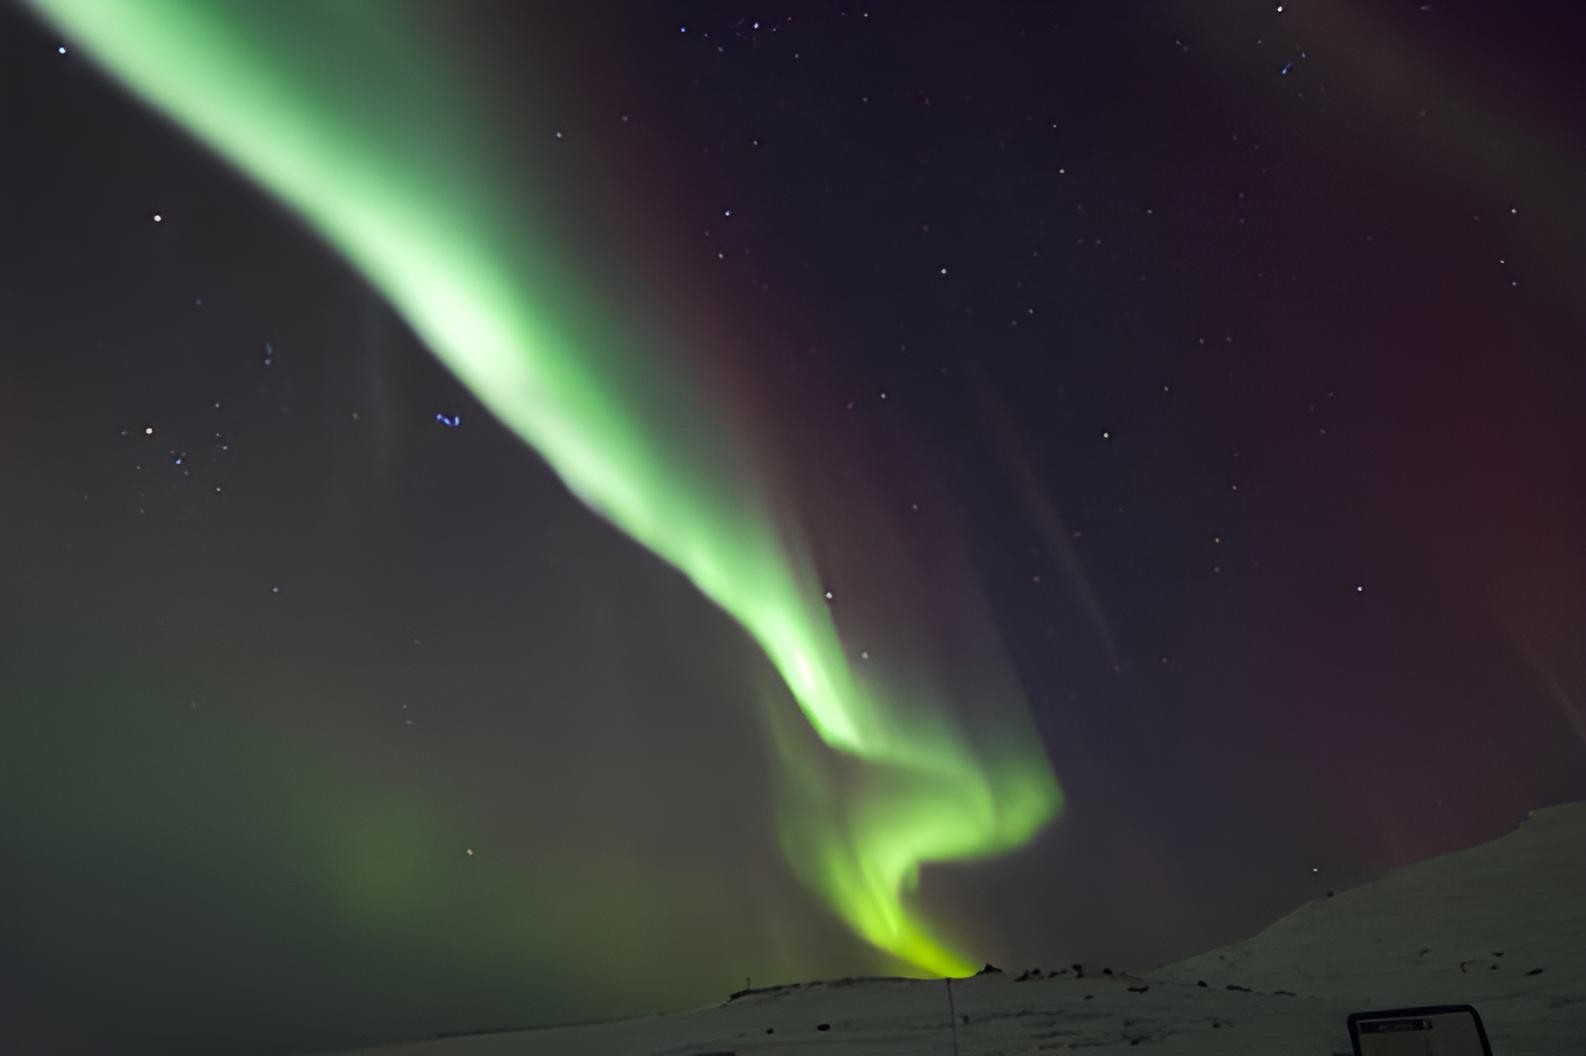 The best way to see Northern Lights in Norway